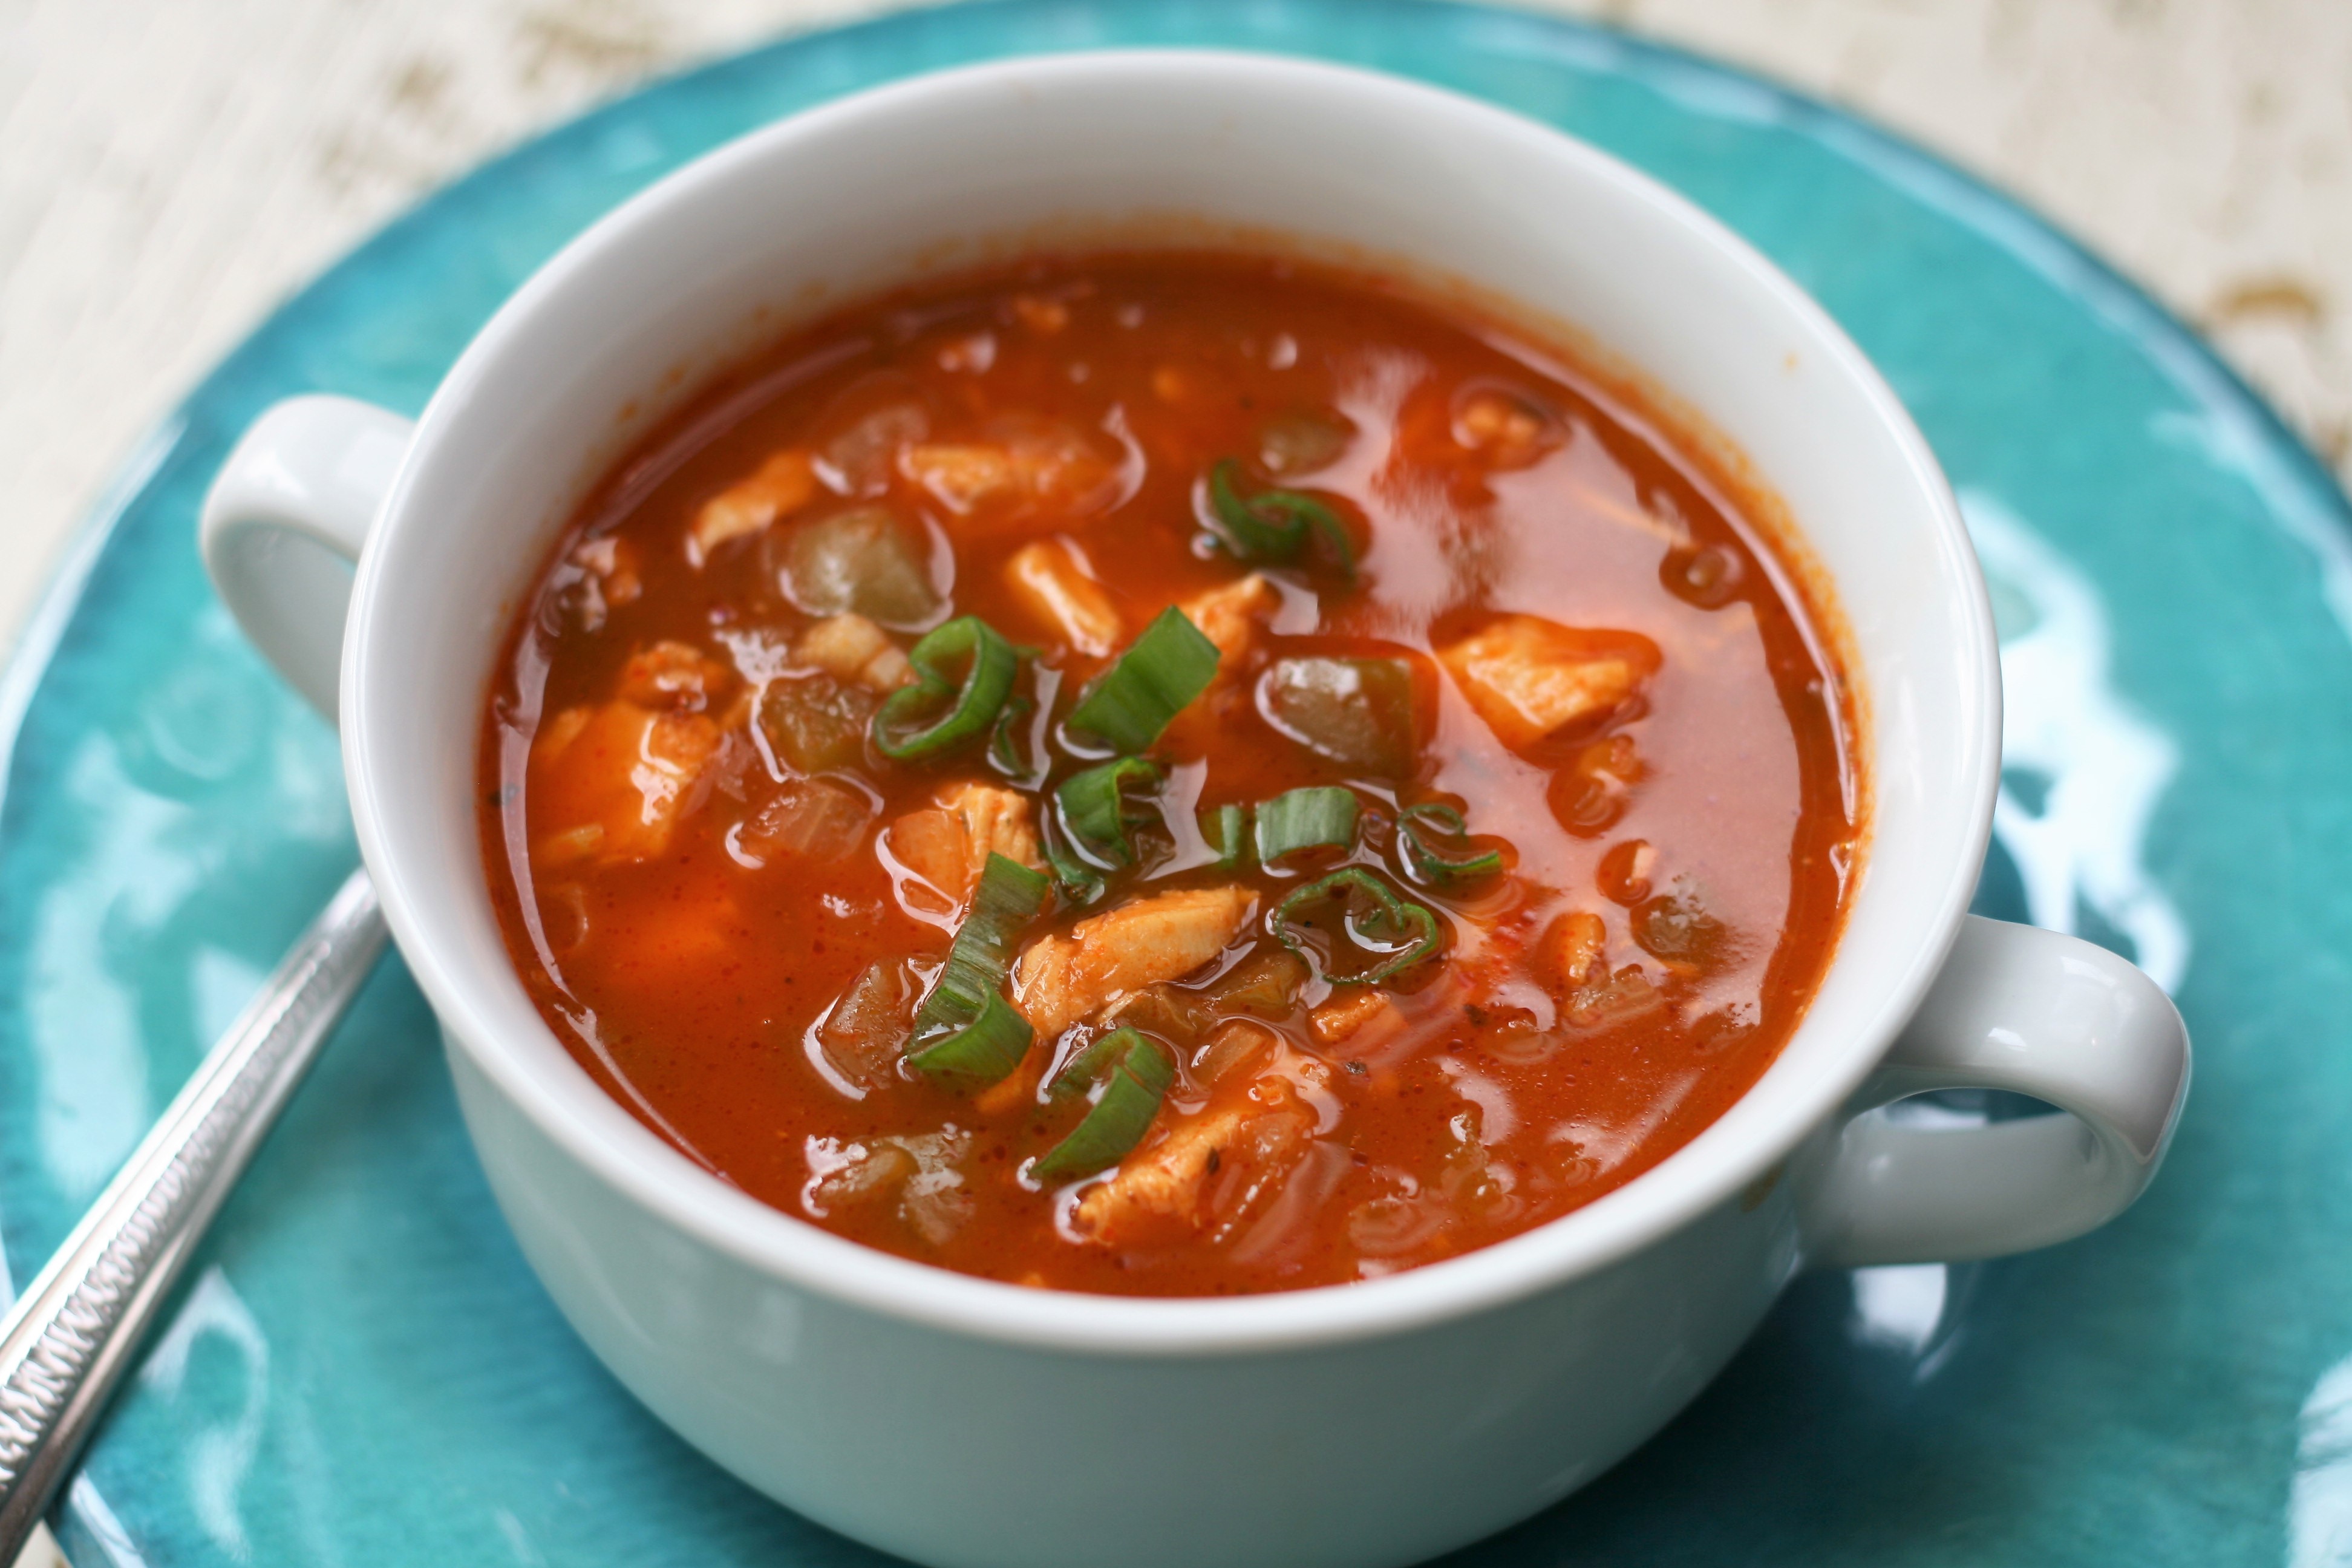 Spicy Smoked Turkey Soup